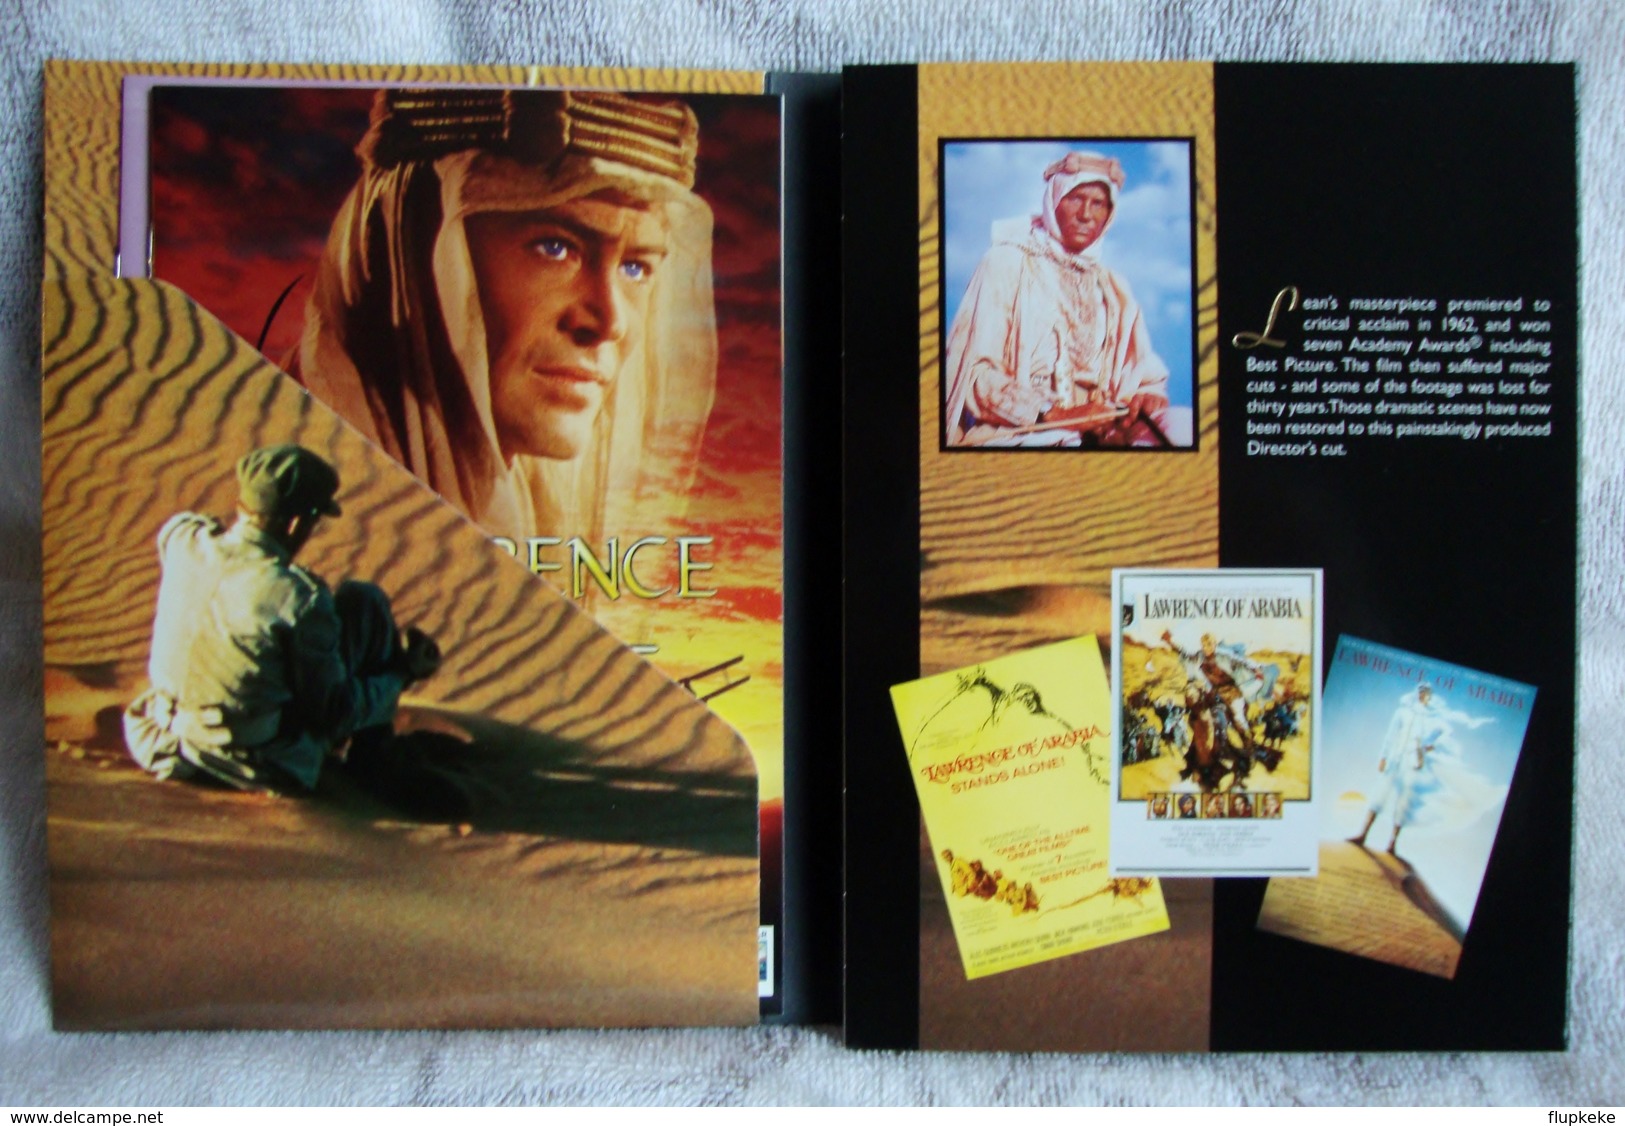 Dvd Zone 2 Lawrence d'Arabie (1962) Special Two Discs Limited Edition Lawrence of Arabia vf+Vostfr